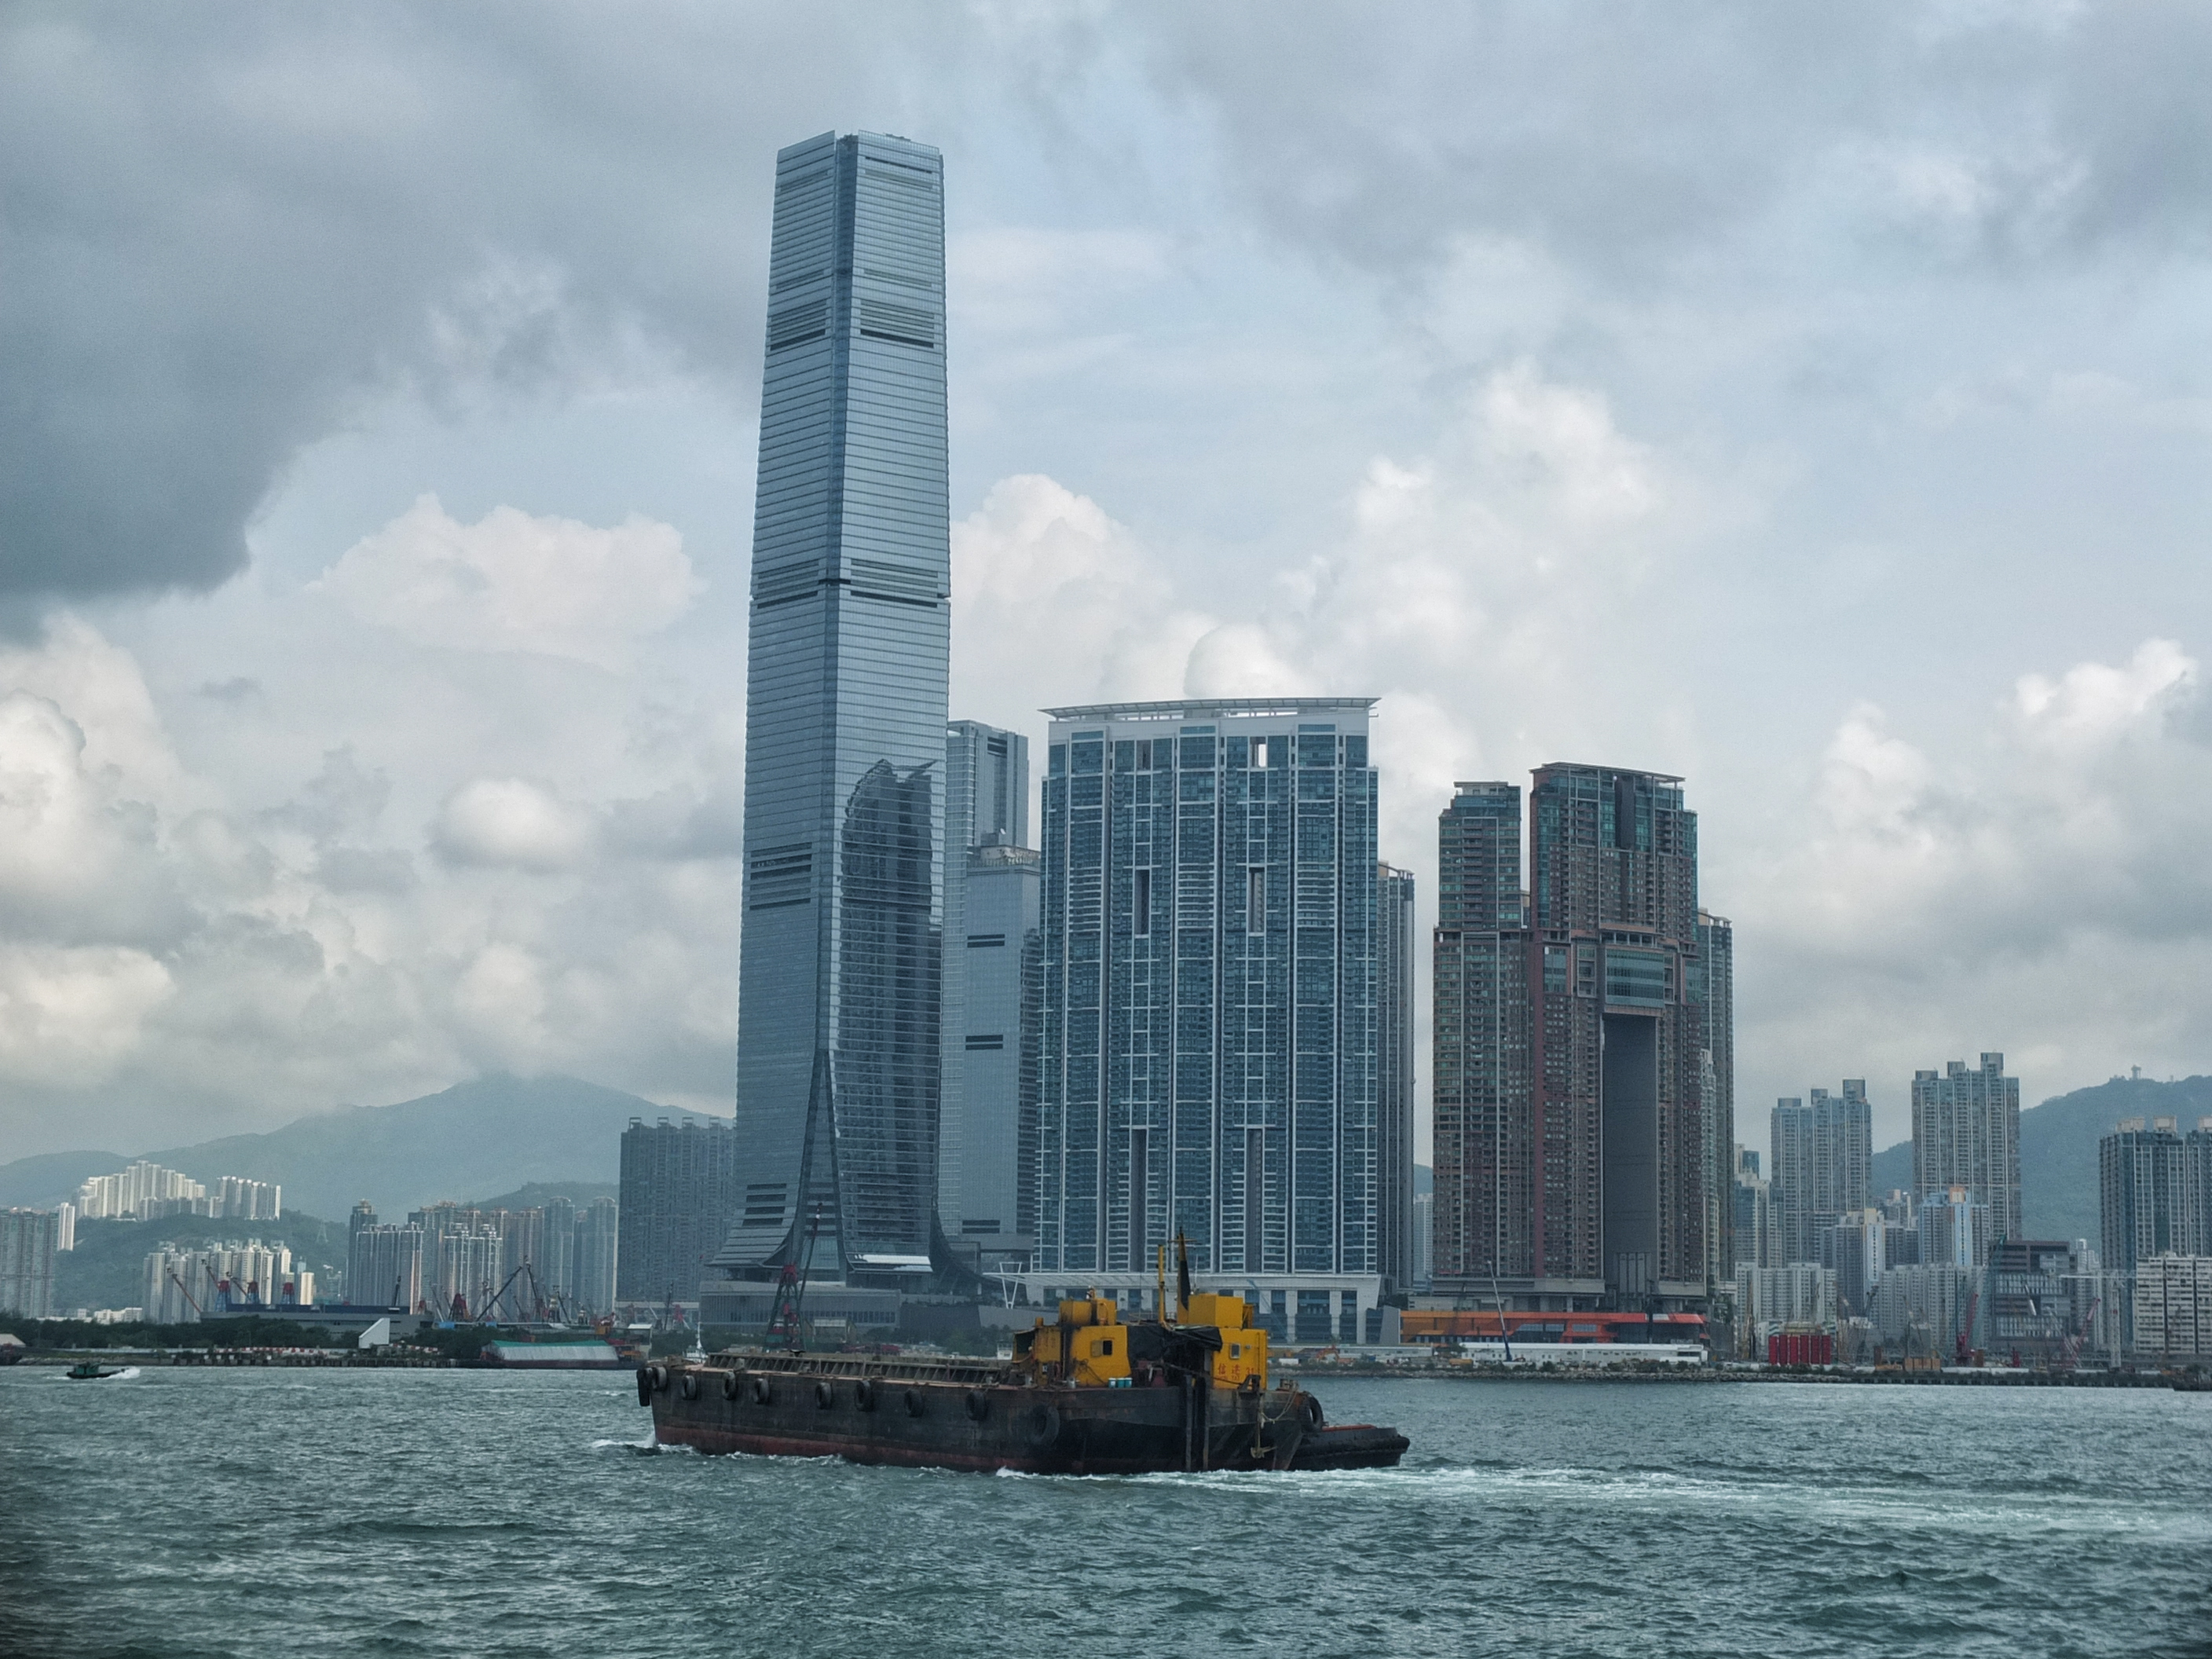 Looking back at Kowloon while riding the Star Ferry